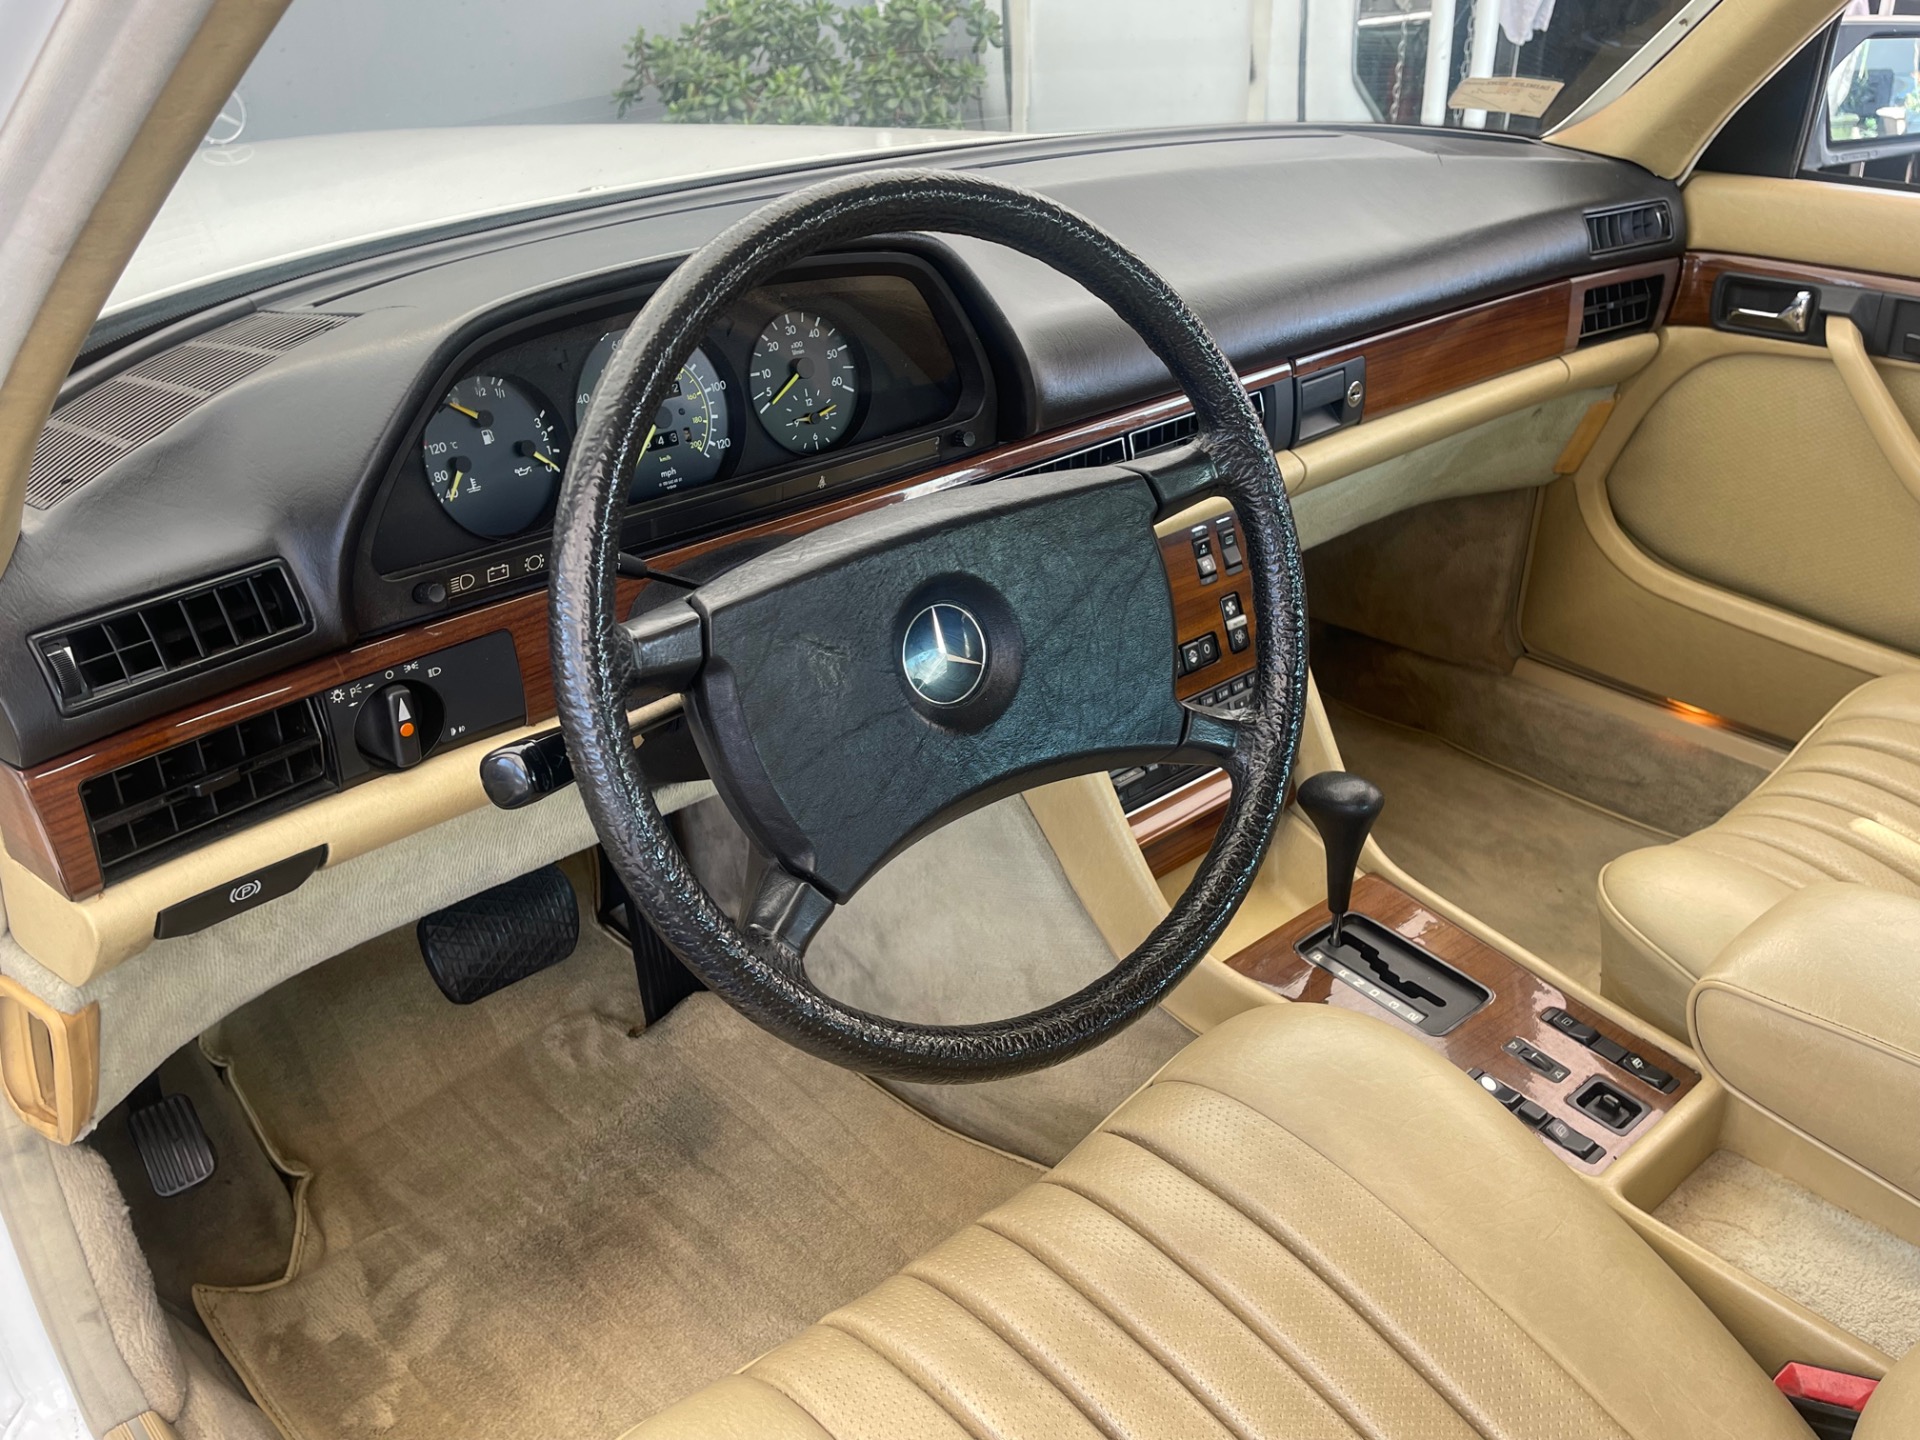 Used 1983 Mercedes Benz 300 Class 300 SD